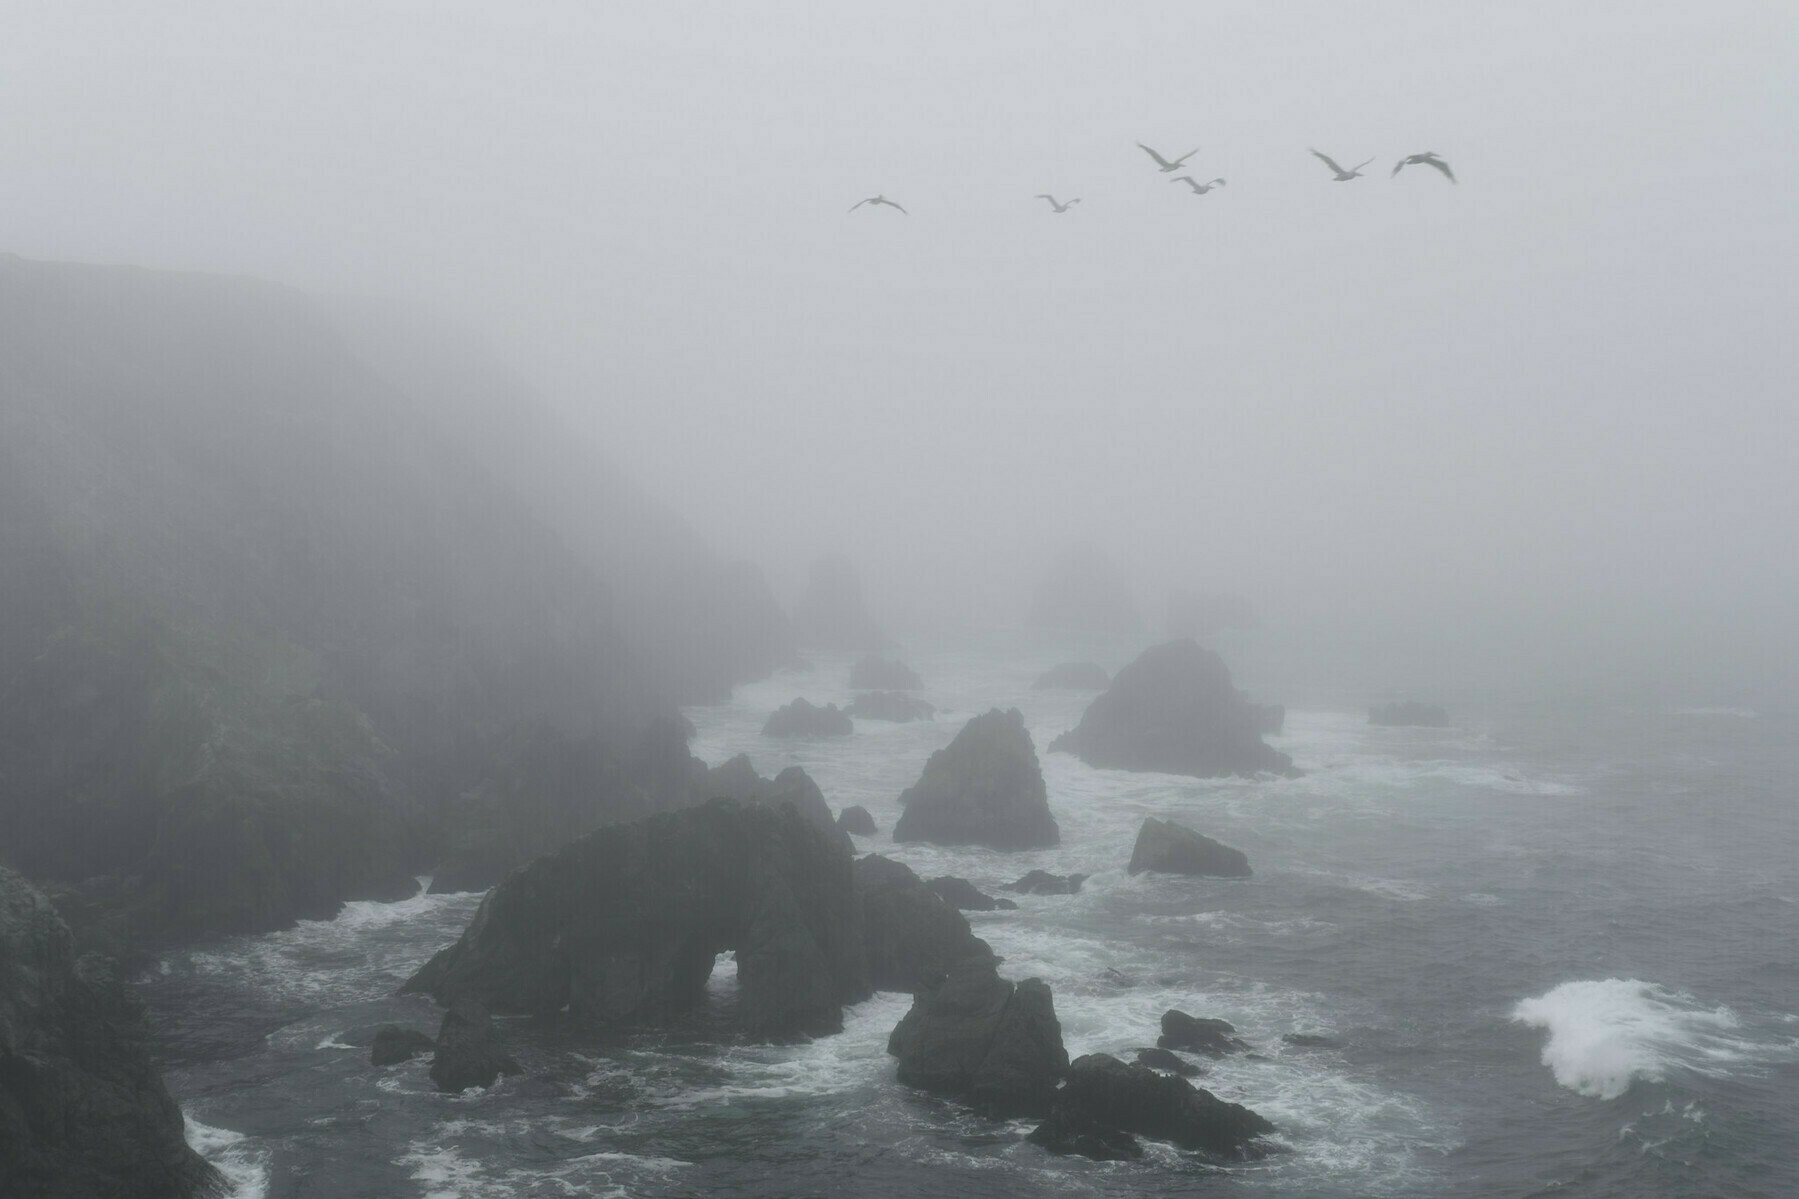 A foggy, rocky ocean coastline with a v-formation of seagulls passing through the upper right of the frame. 